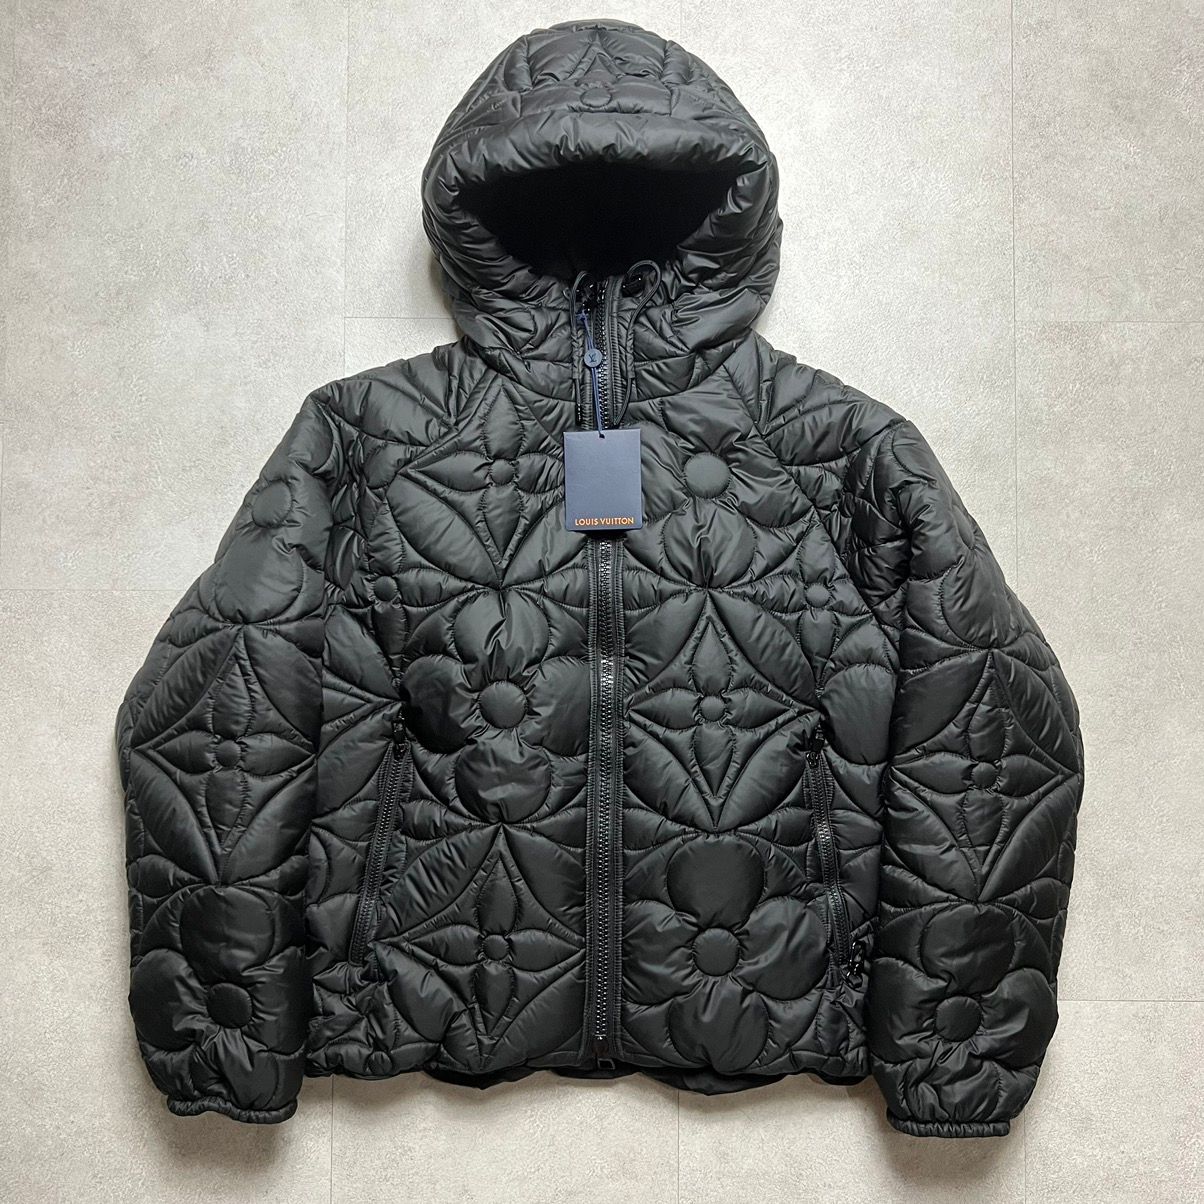 Louis Vuitton Lvse Flower Quilted Hoodie Jacket BLACK. Size 48